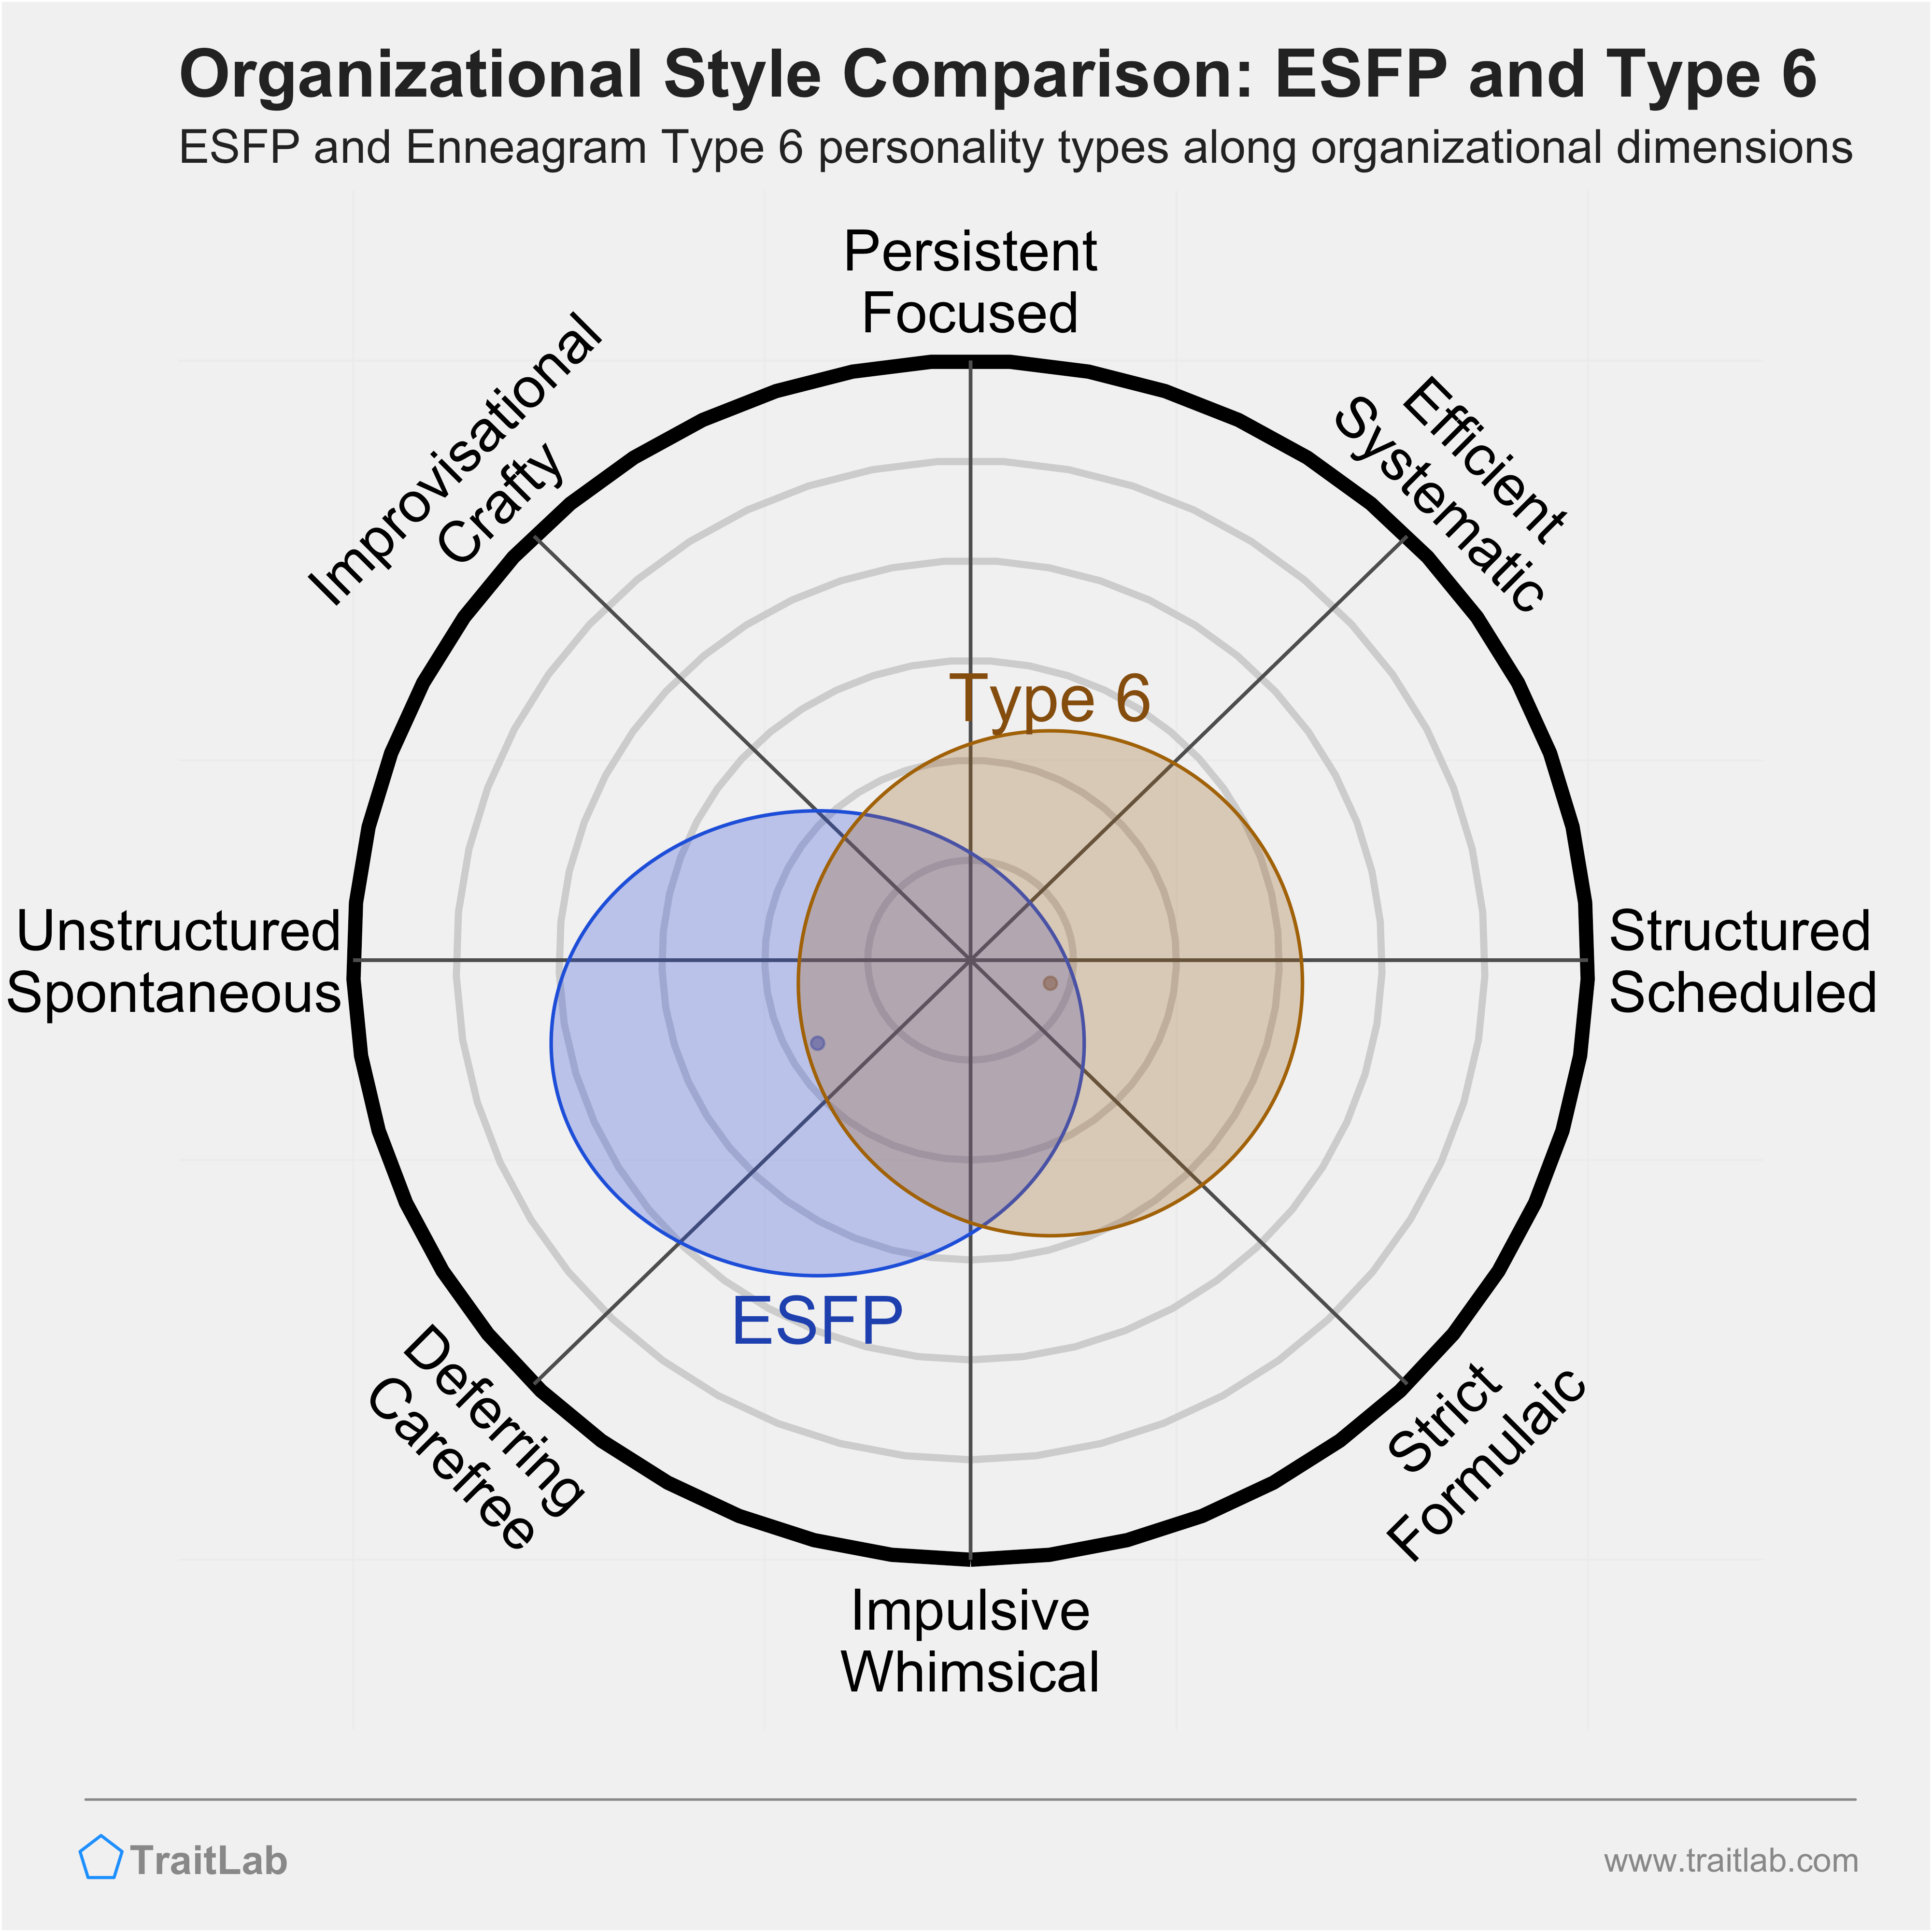 ESFP and Type 6 comparison across organizational dimensions